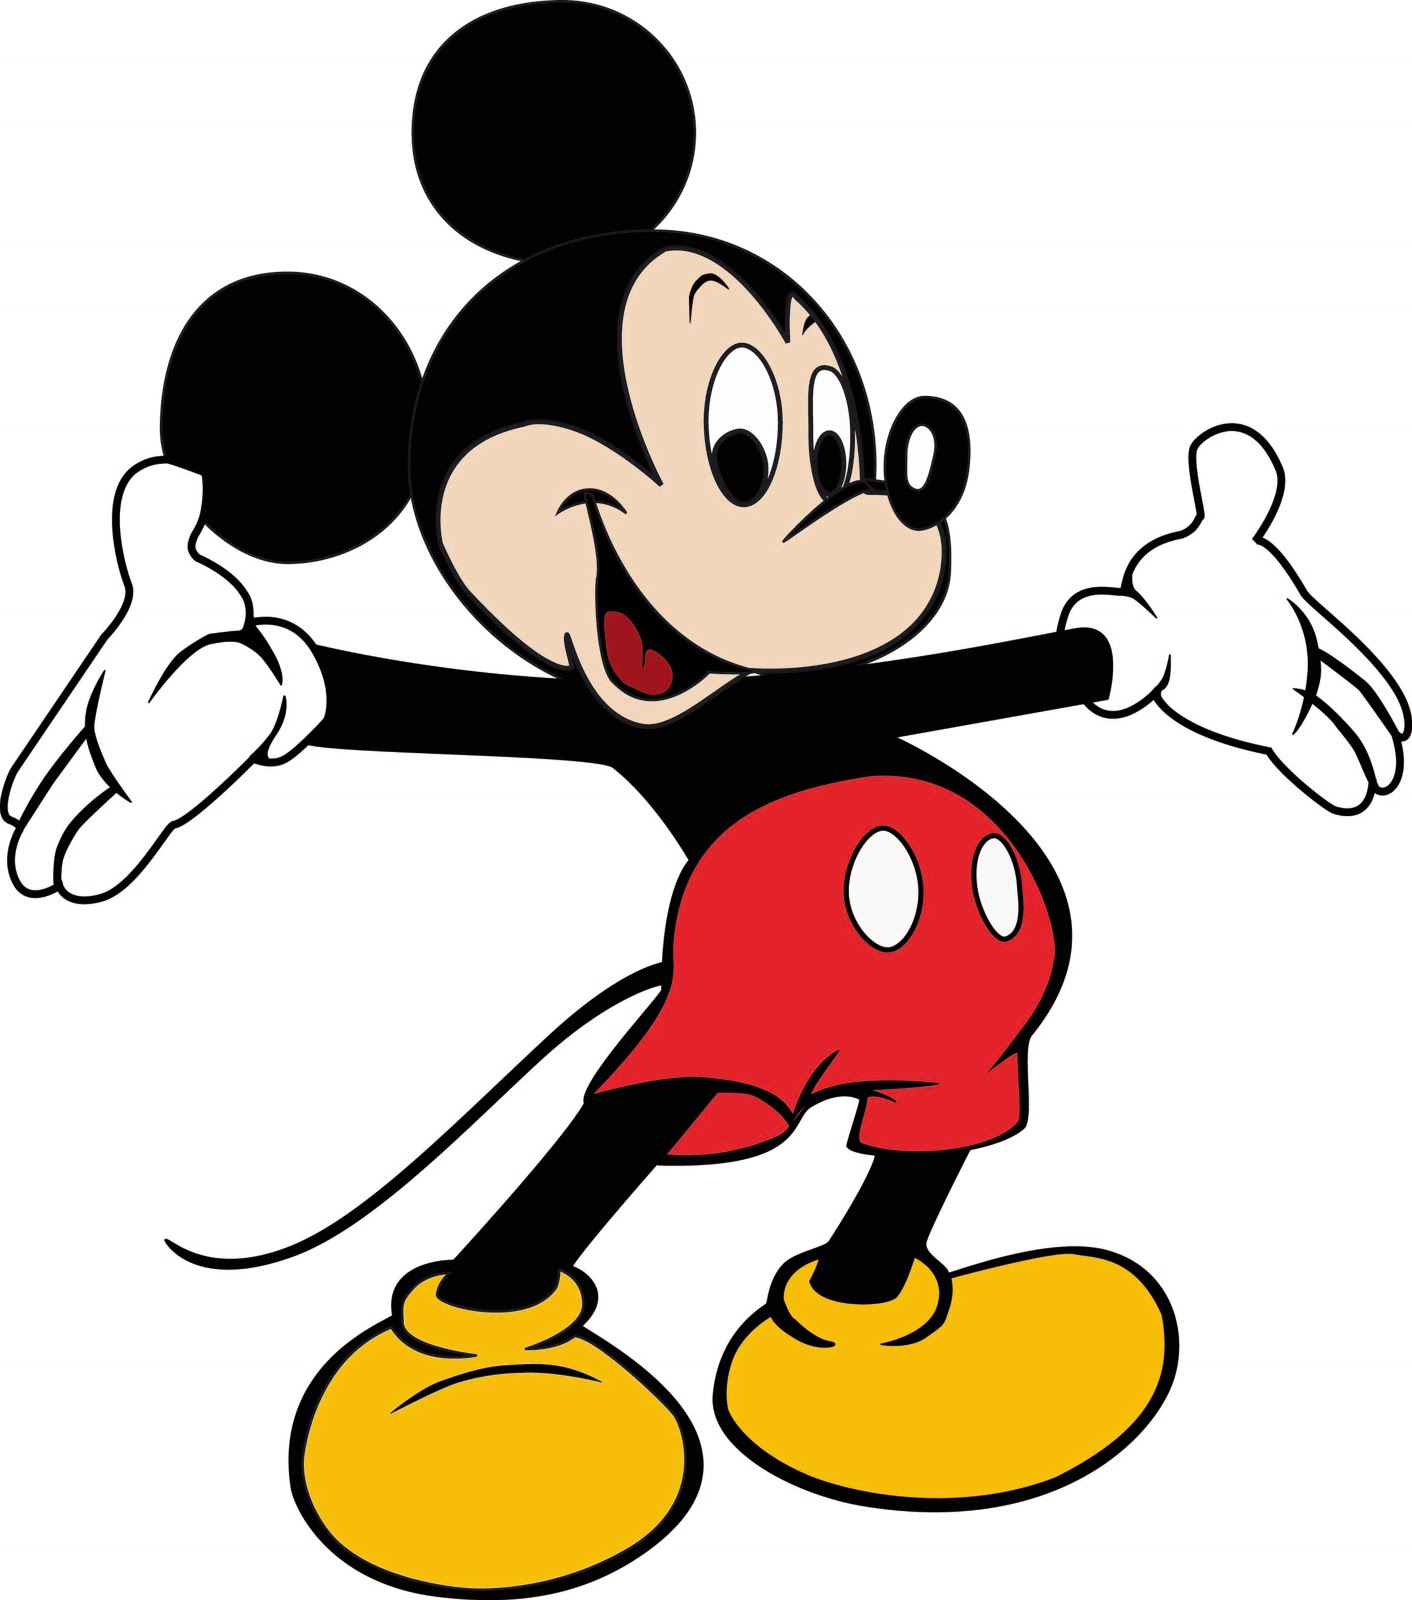 Gambar Mickey Mouse - ClipArt Best